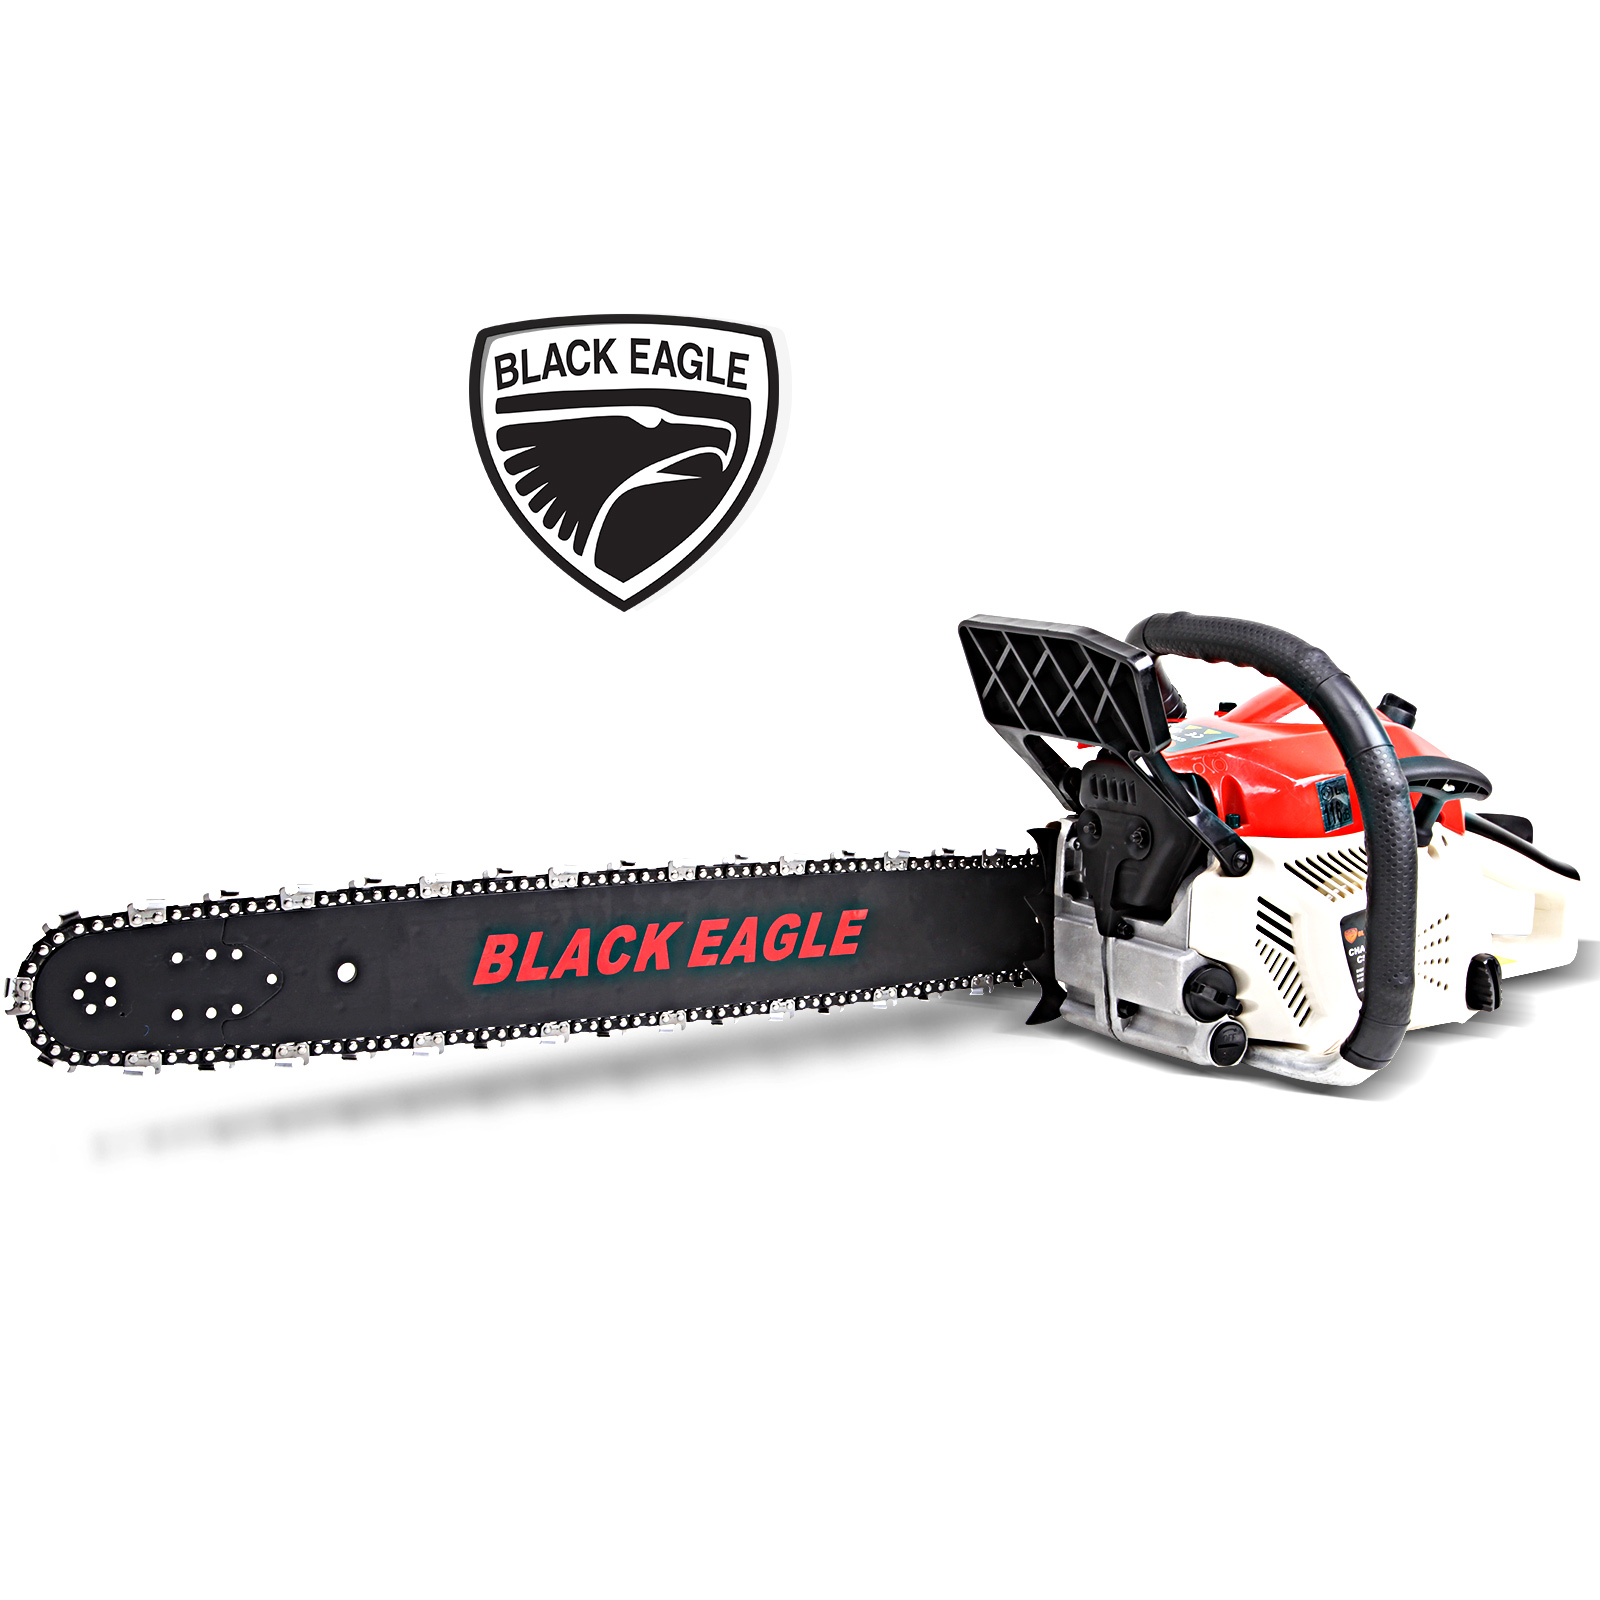 NEW BlackEagle 82cc Commercial Petrol Chainsaw EStart 24" Chain Saw Tree Pruning